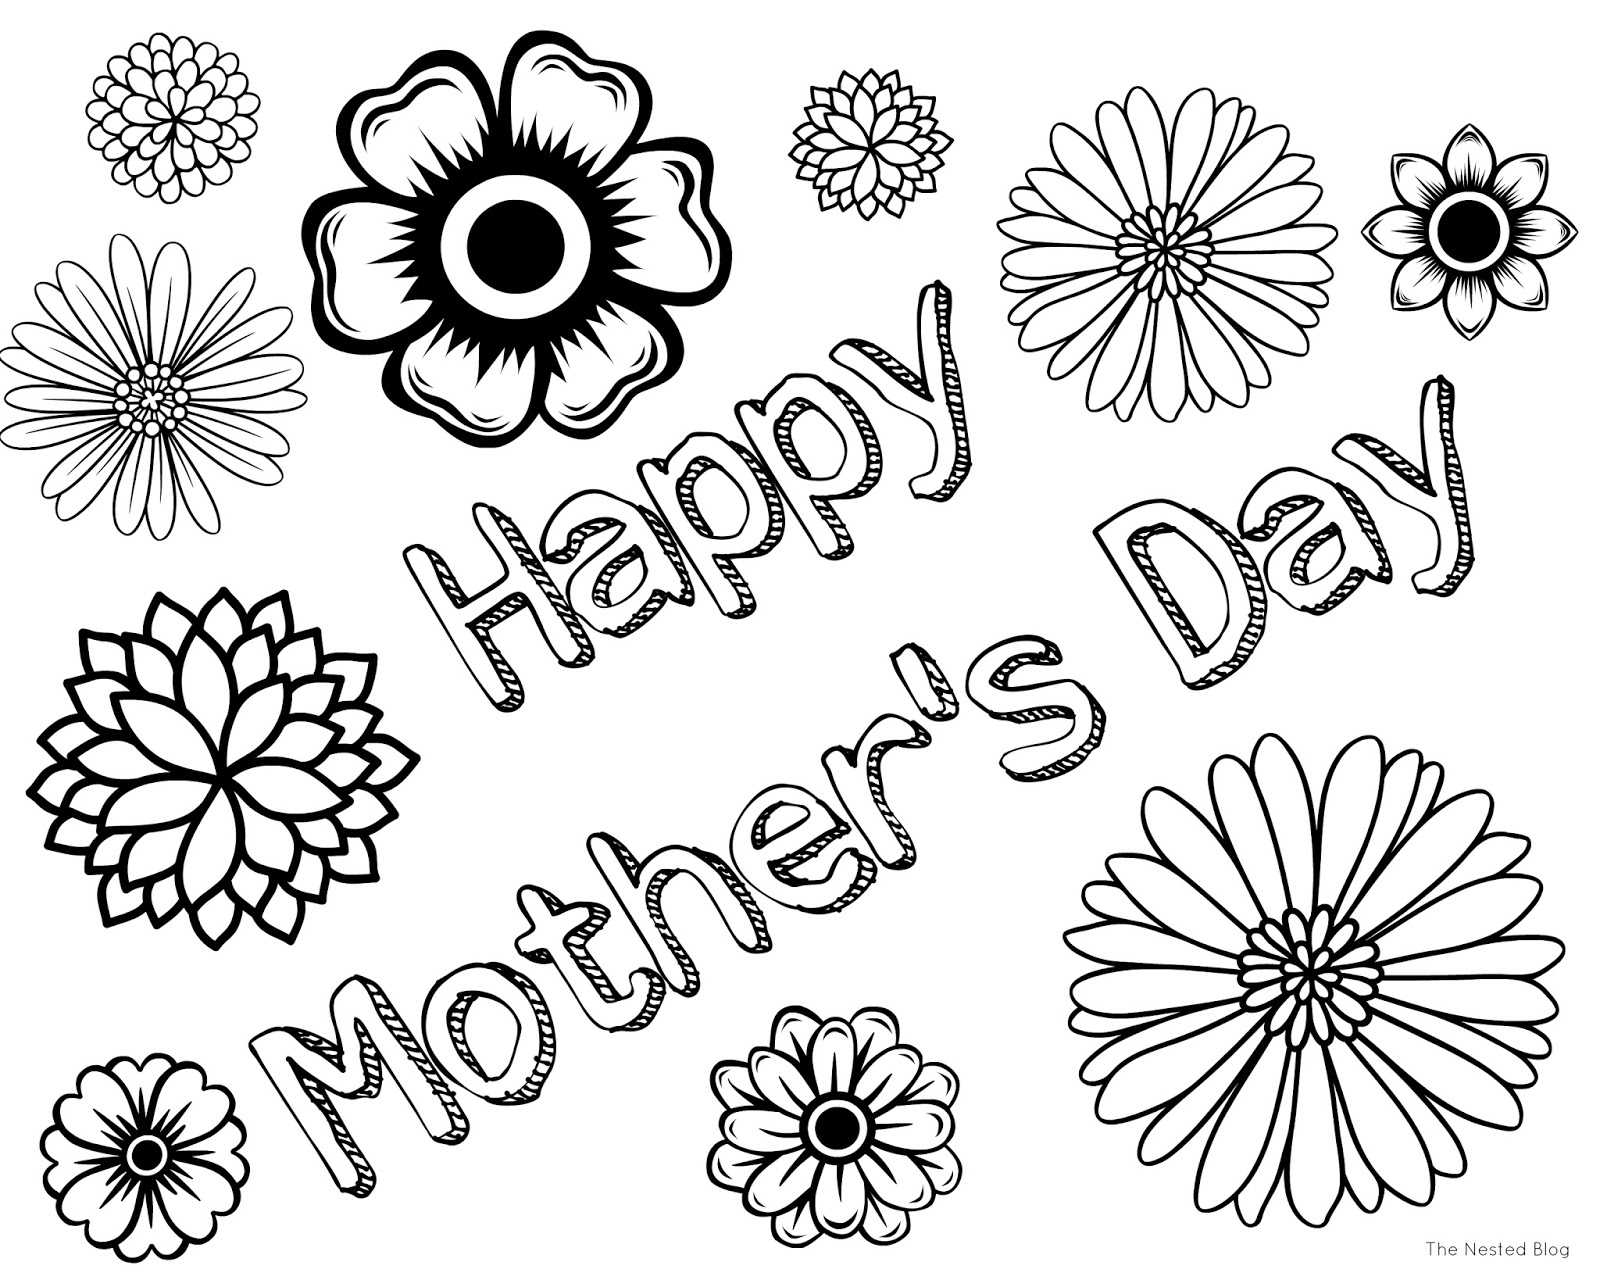 mother-s-day-2016-colouring-pages-for-kids-and-youngs-mothers-day-in